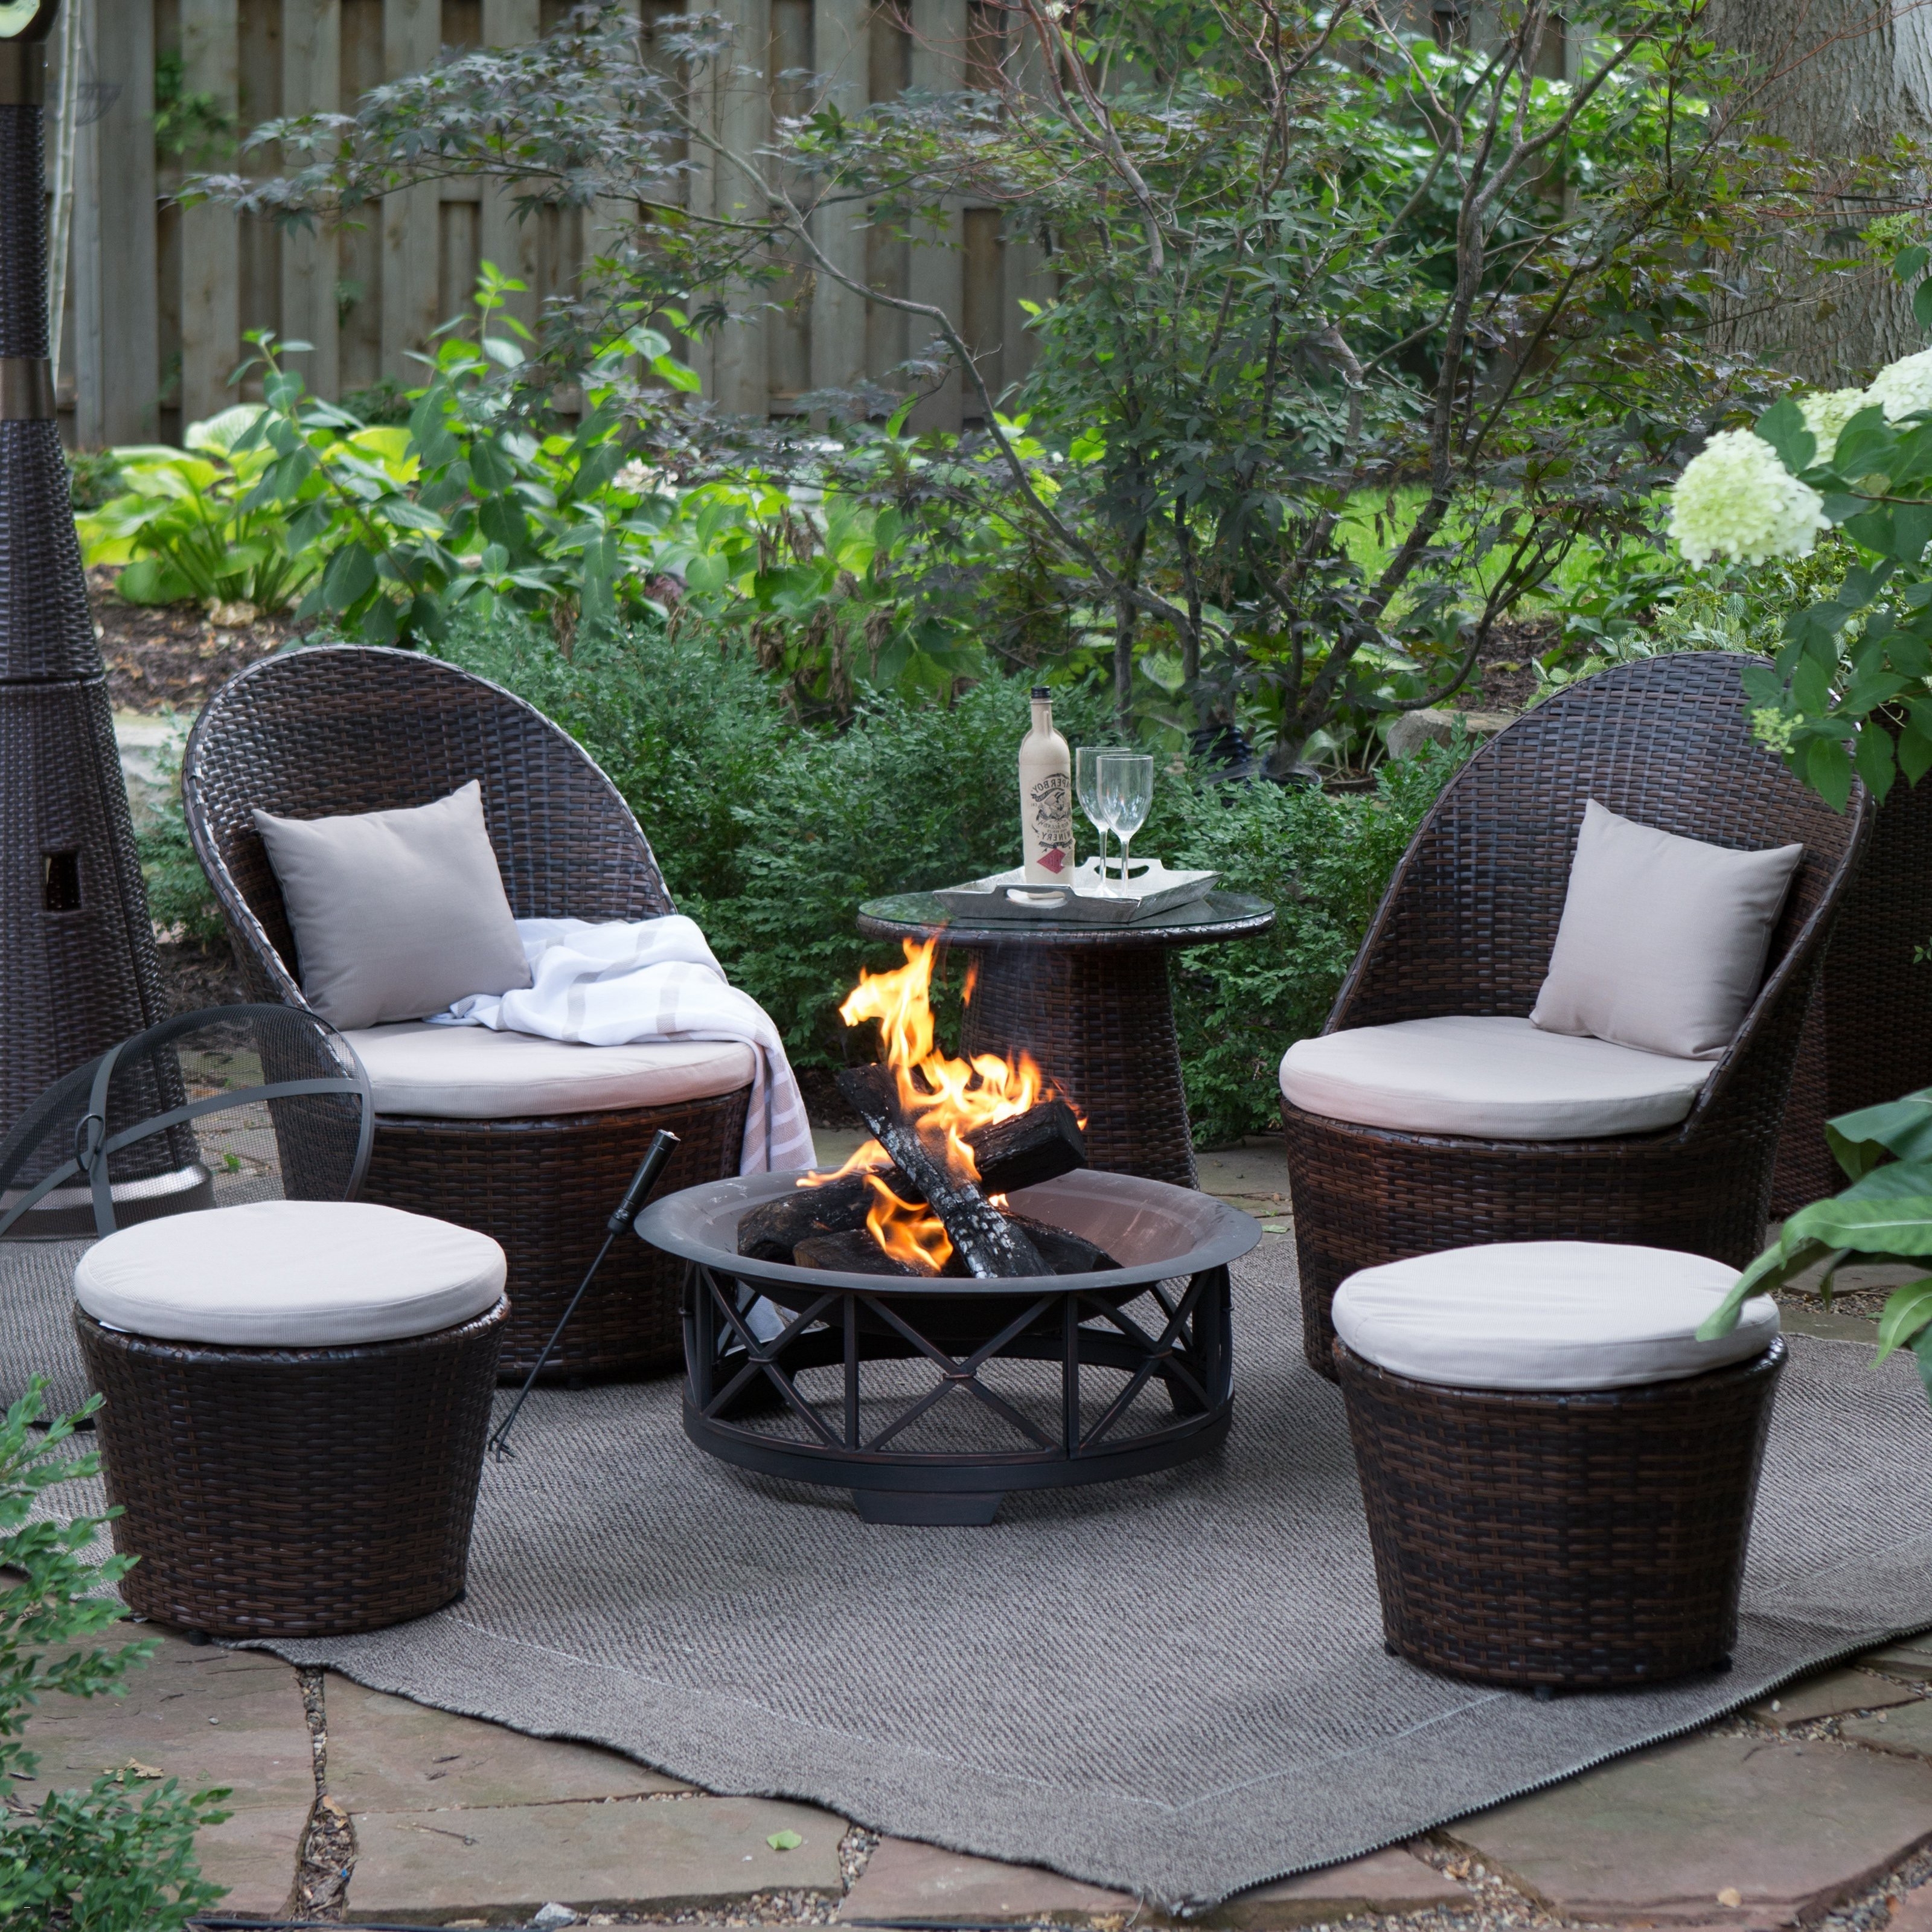 Inexpensive Outdoor Fireplace With Patio Chair